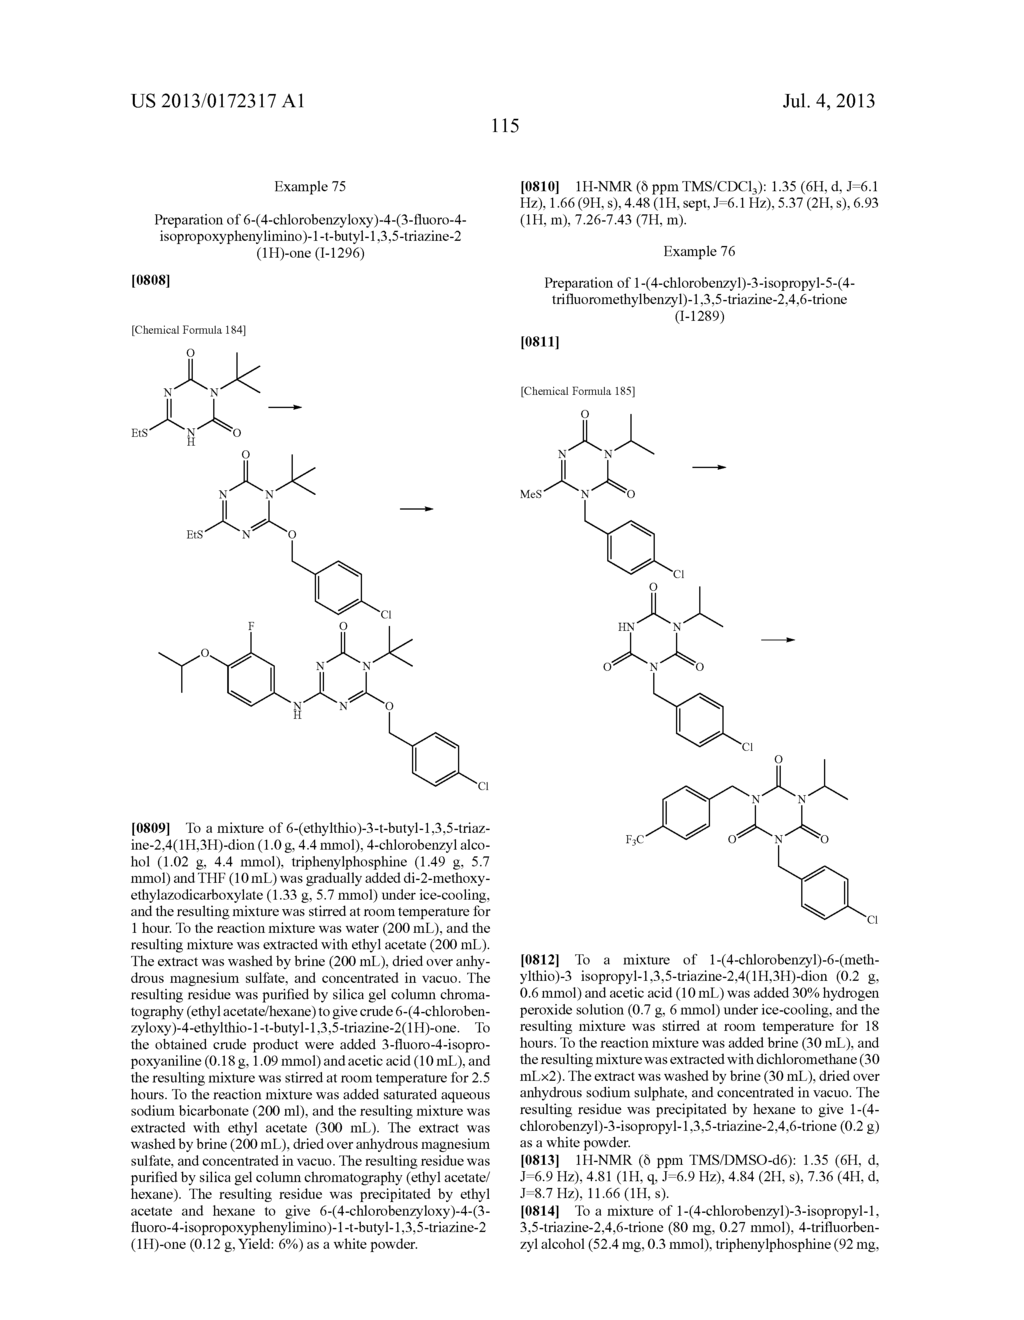 TRIAZINE DERIVATIVE AND PHARMACEUTICAL COMPOSITION HAVING AN ANALGESIC     ACTIVITY COMPRISING THE SAME - diagram, schematic, and image 116